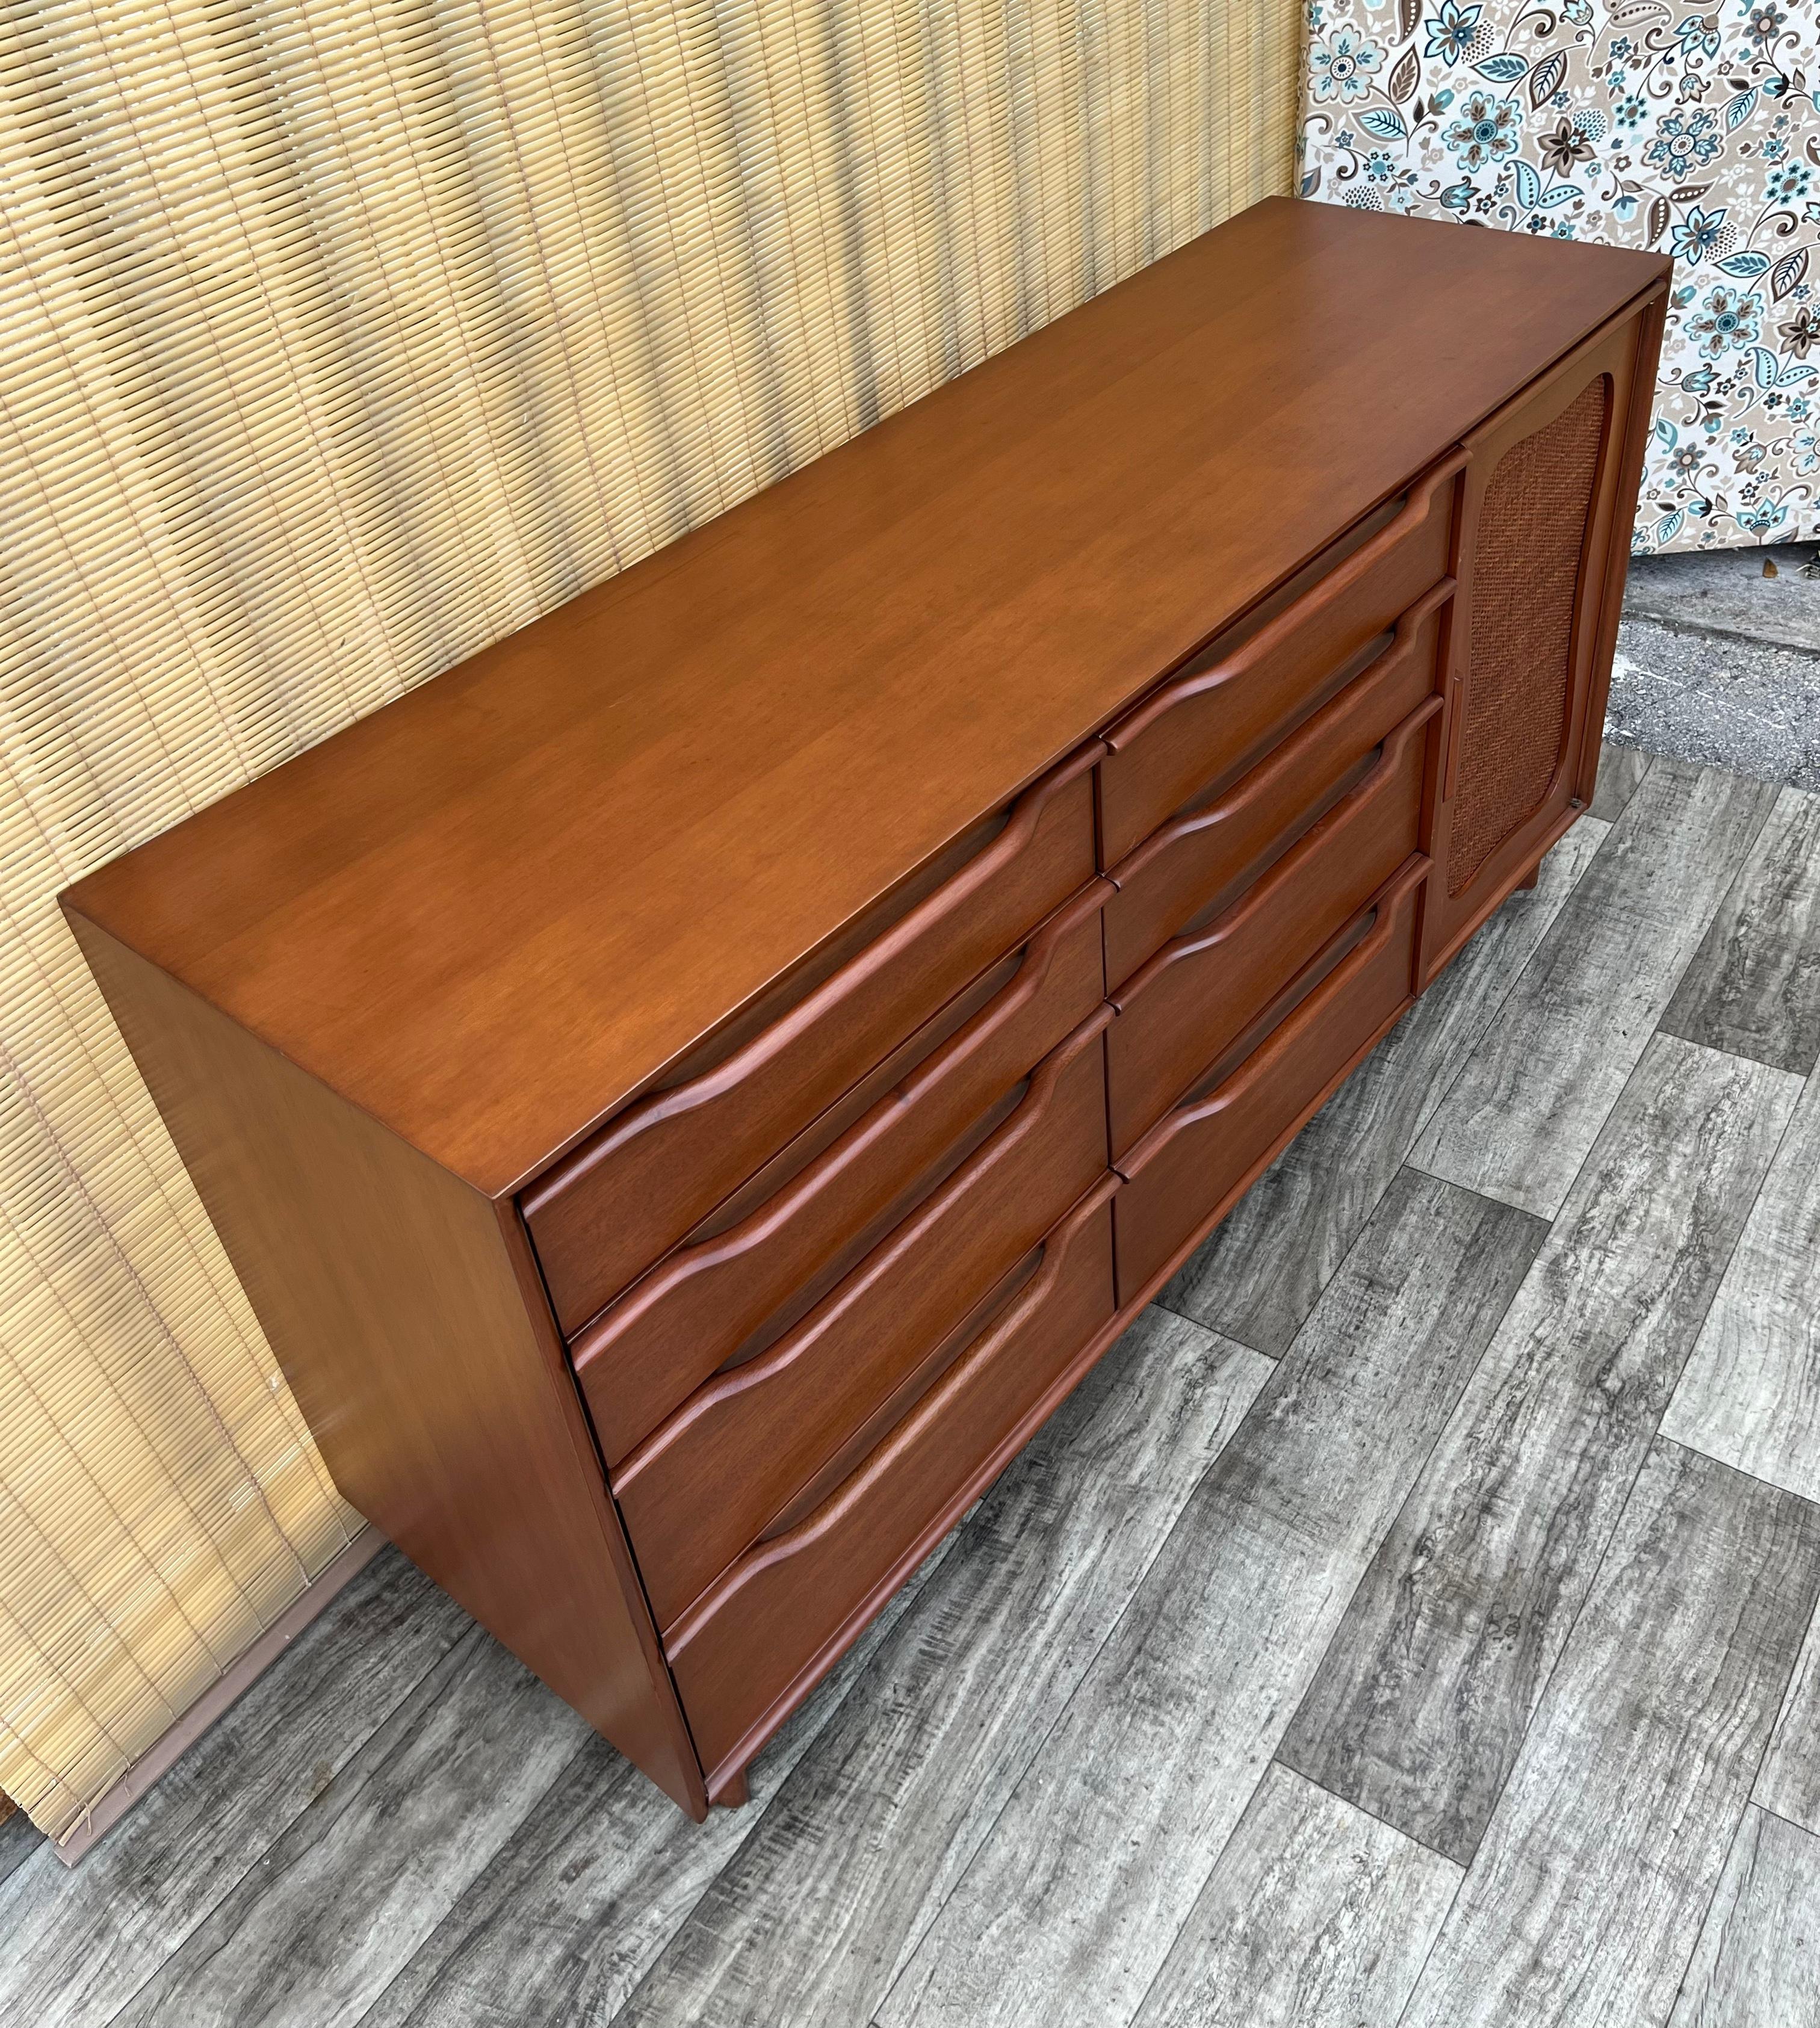 Wood Fully Refinished Mid Century Modern Dresser by Hickory Manufacturing Company. For Sale